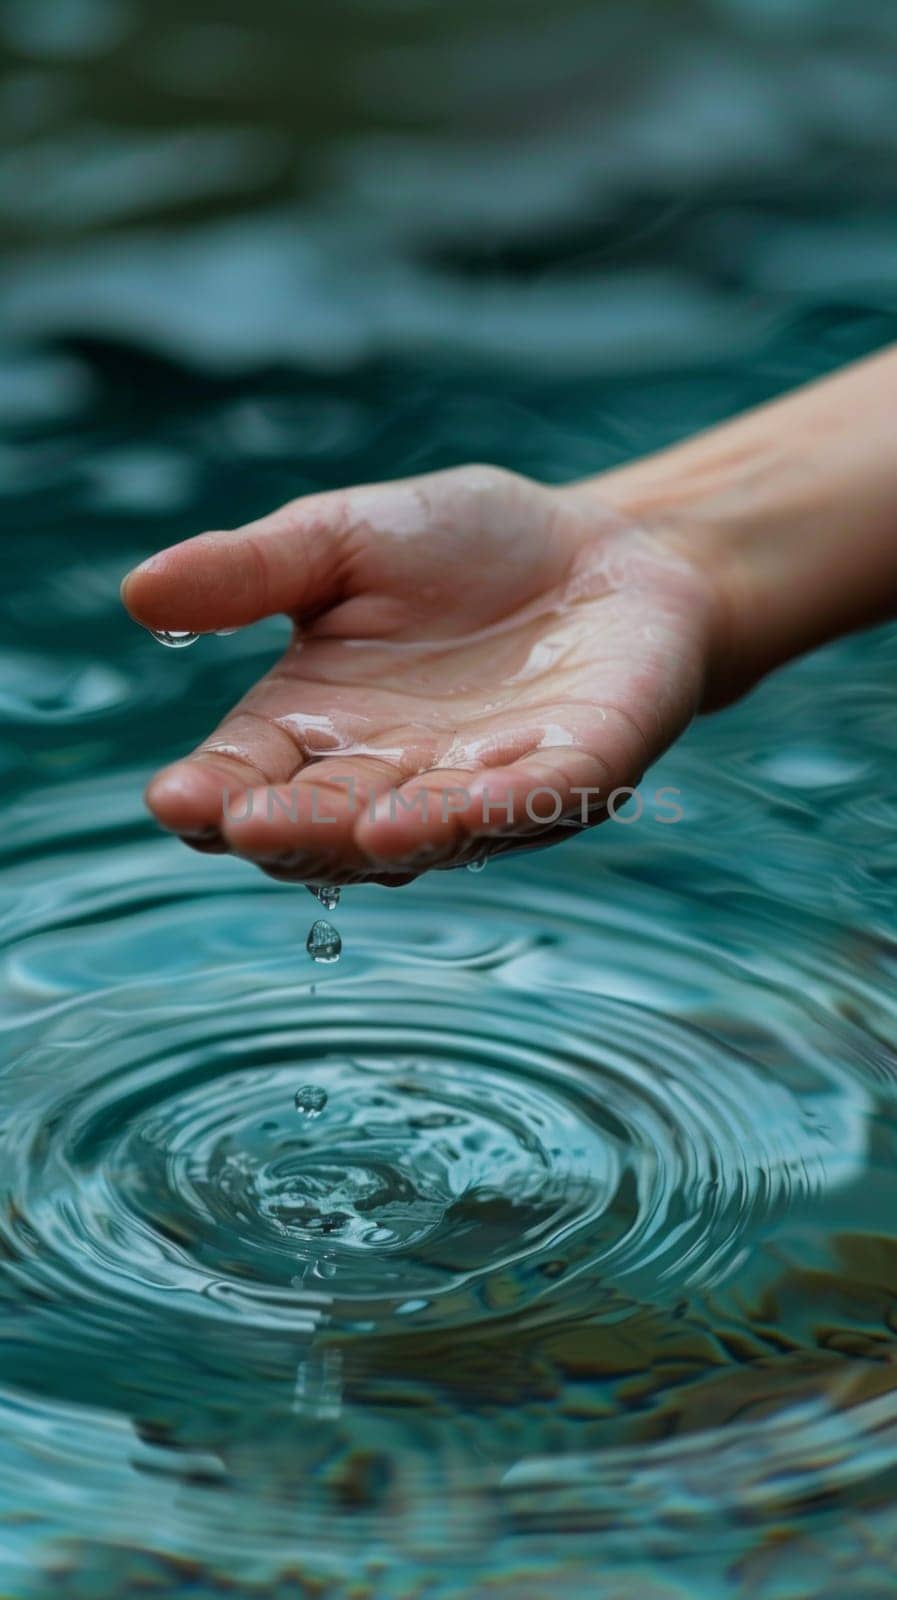 A person's hand is in the water and it has a drop of rain on its palm